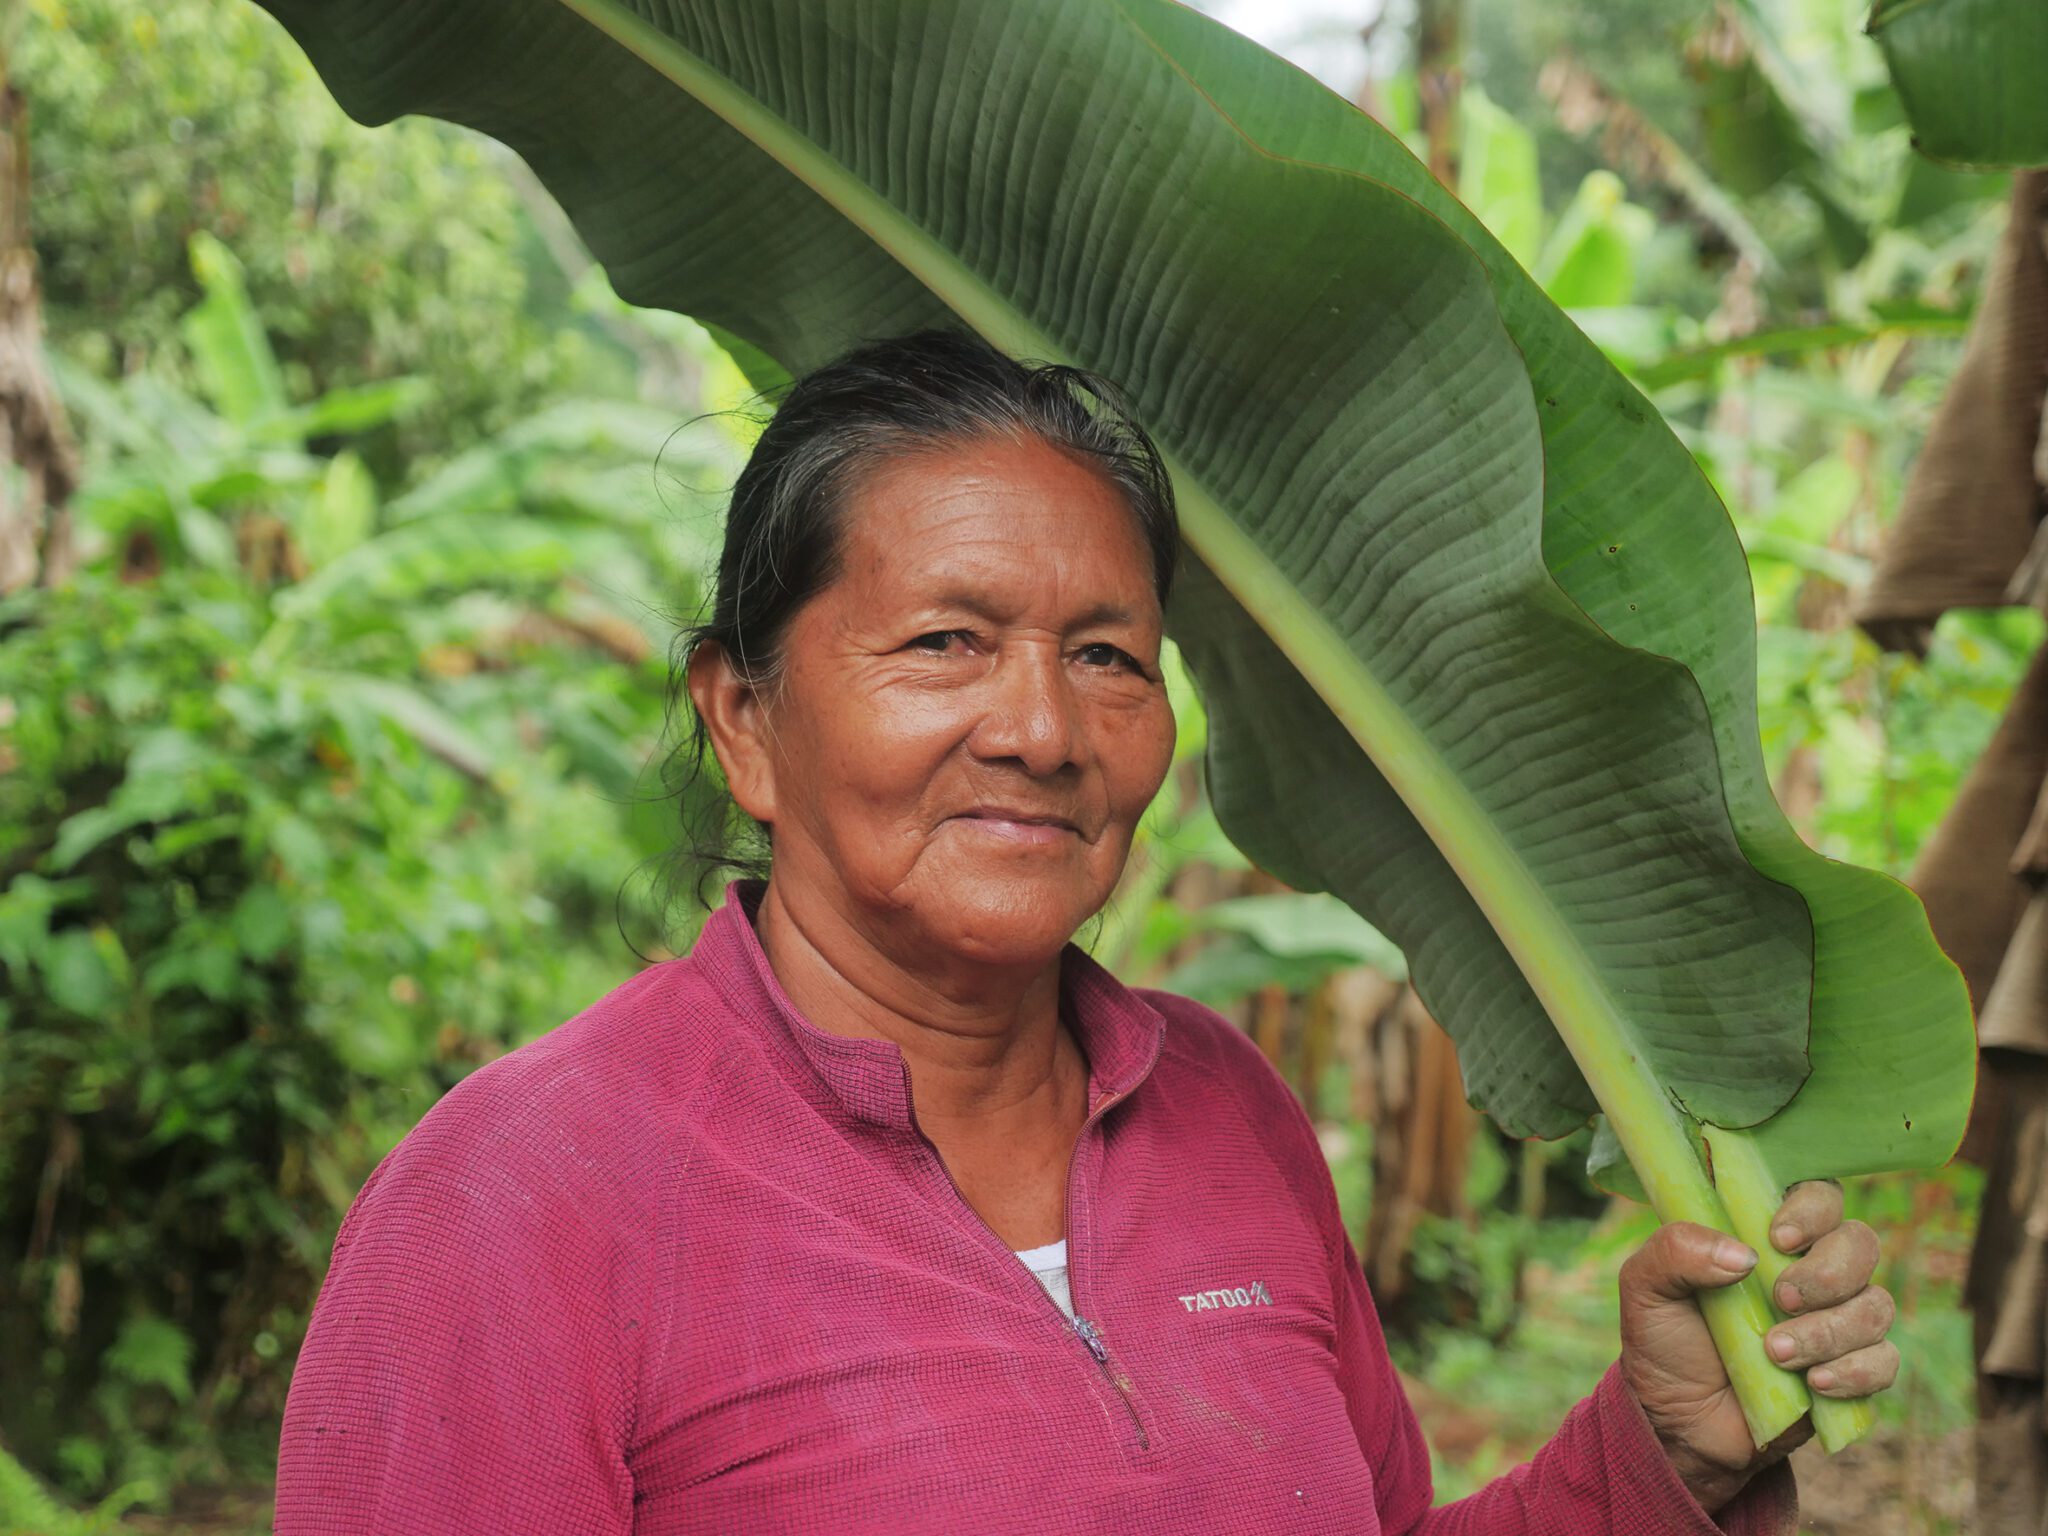 Building resilience and livelihood opportunities in Ecuador